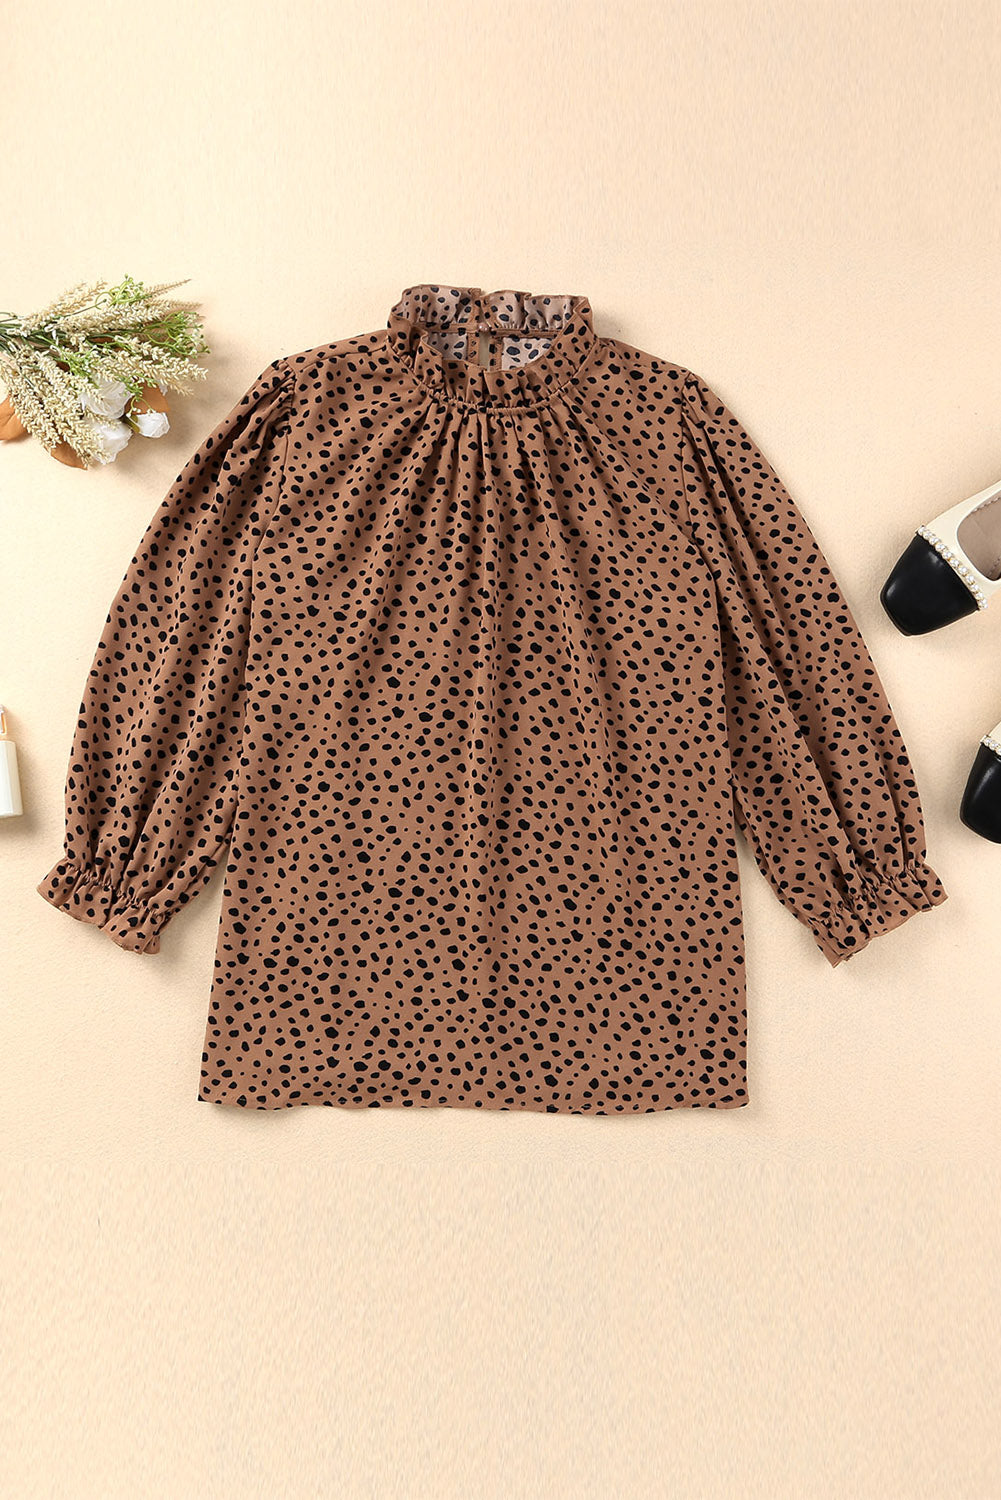 Brown Frilled Neck 3/4 Sleeves Cheetah Blouse